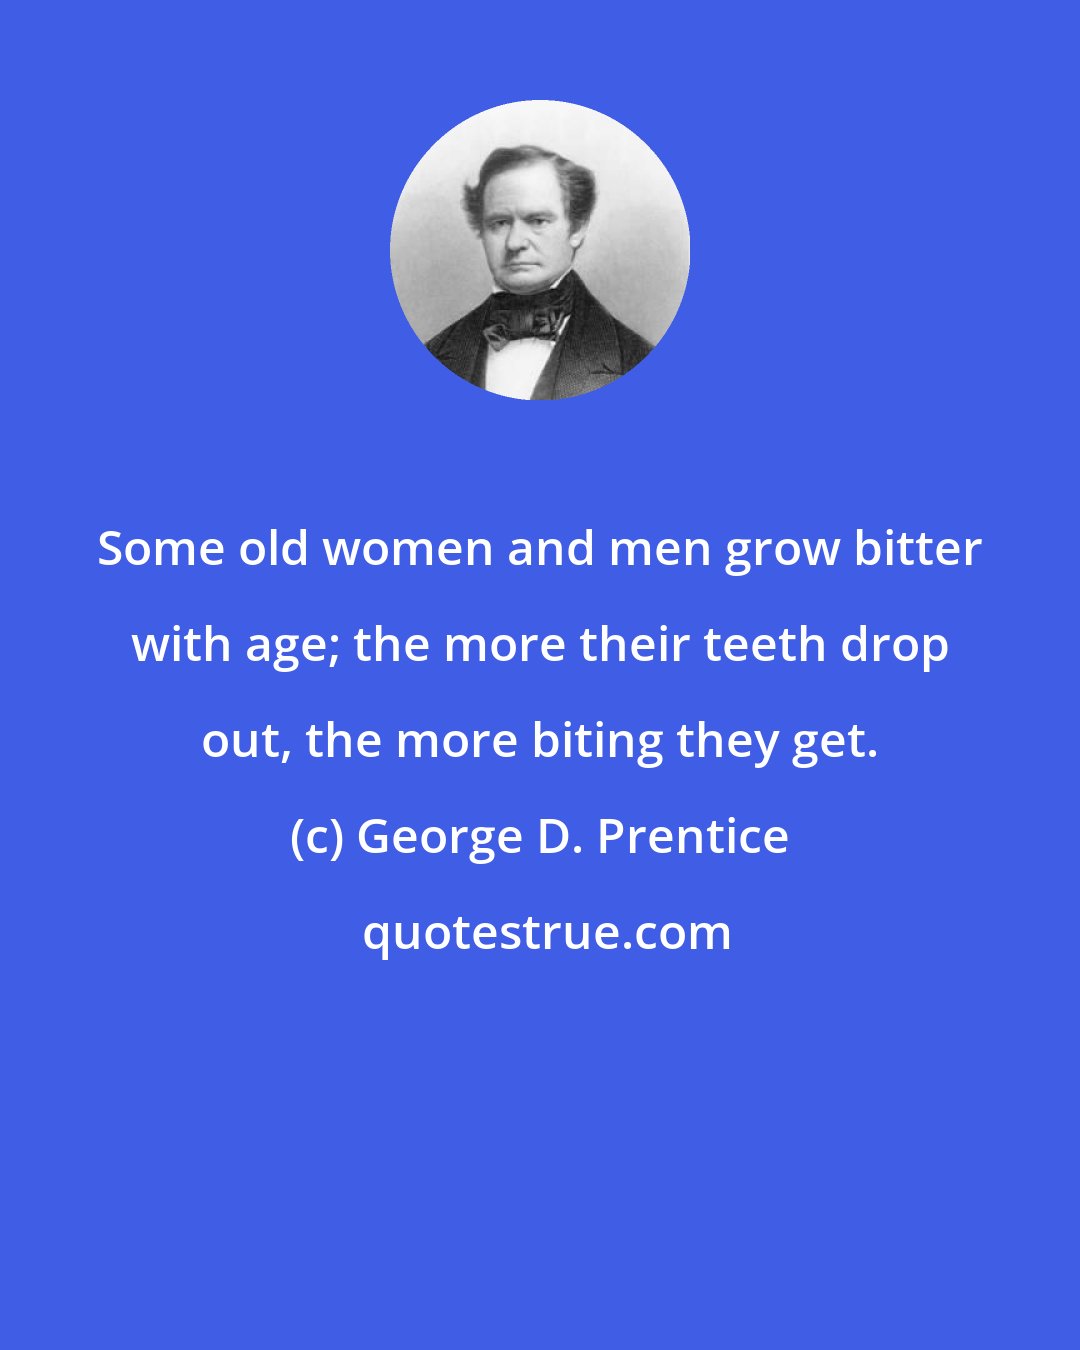 George D. Prentice: Some old women and men grow bitter with age; the more their teeth drop out, the more biting they get.